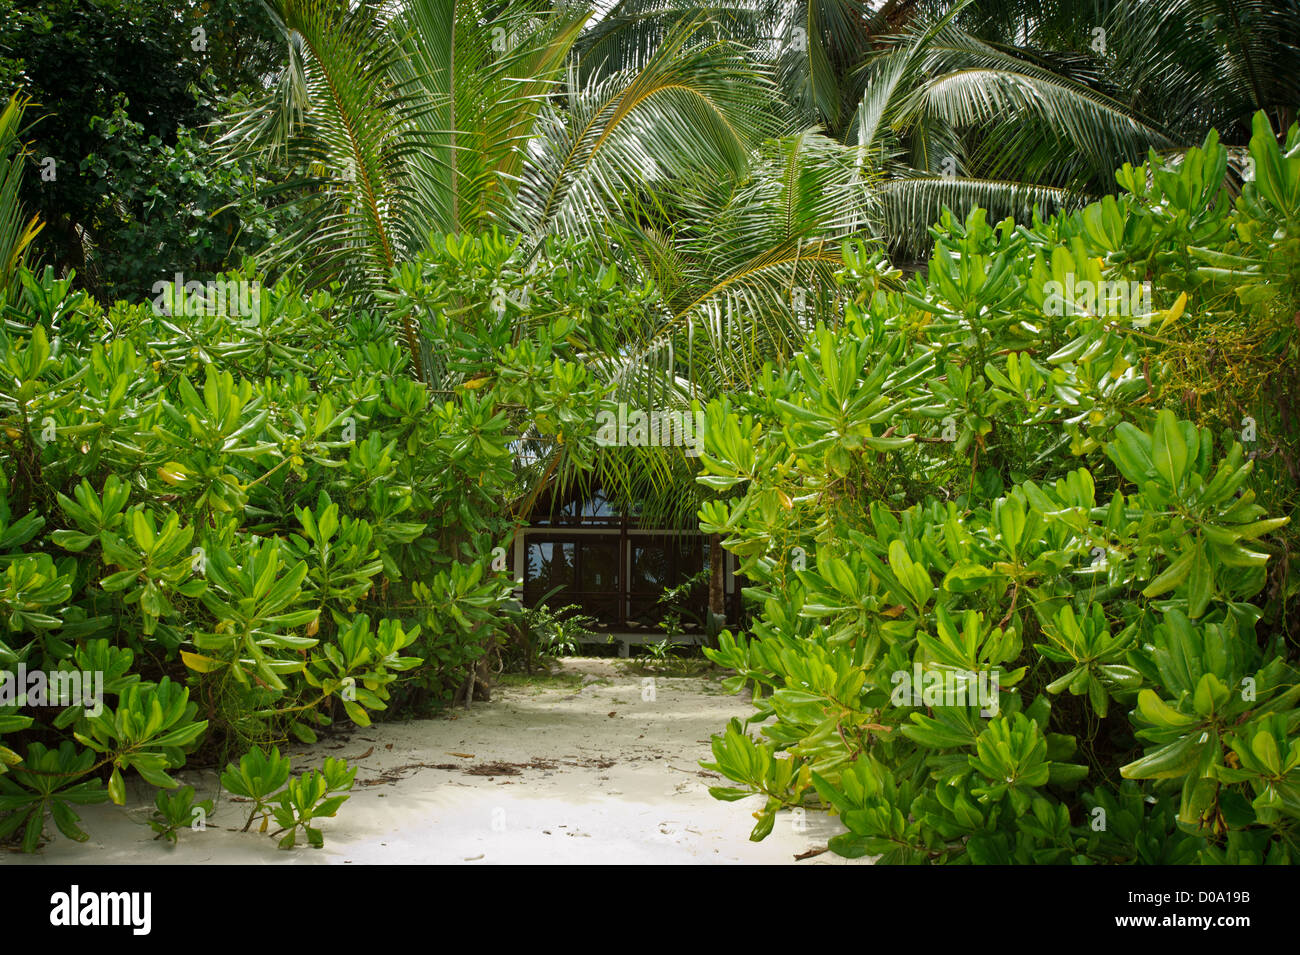 the sandy path to one of the Bungalow in Aloita Island, Mentawai, West Sumatra, Indonesia Stock Photo